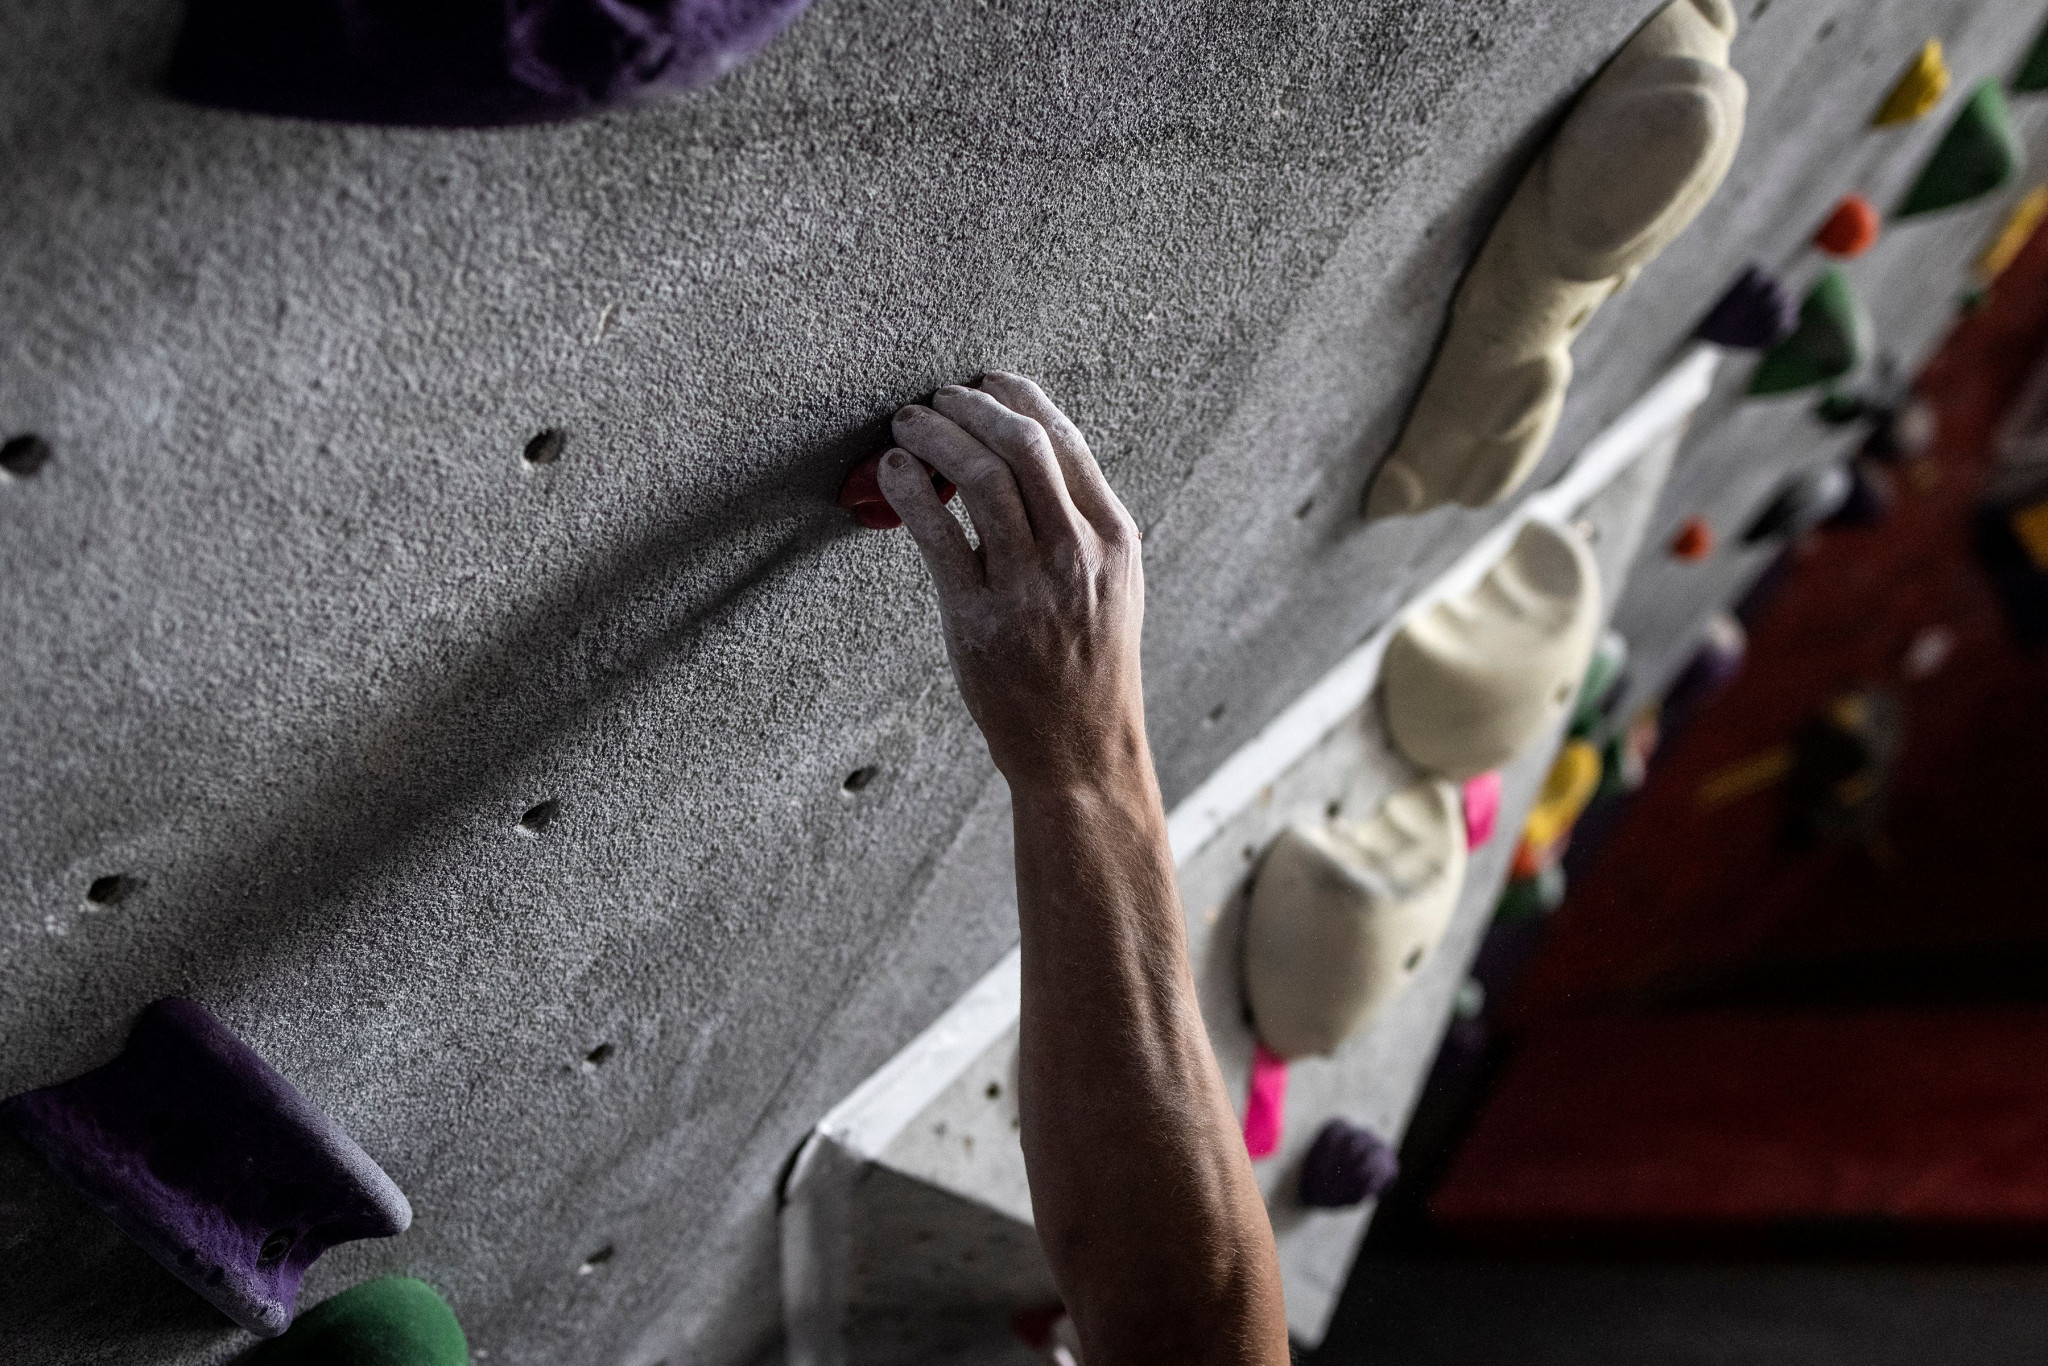 The International Federation of Sport Climbing made an operating profit in 2020 ©Getty Images